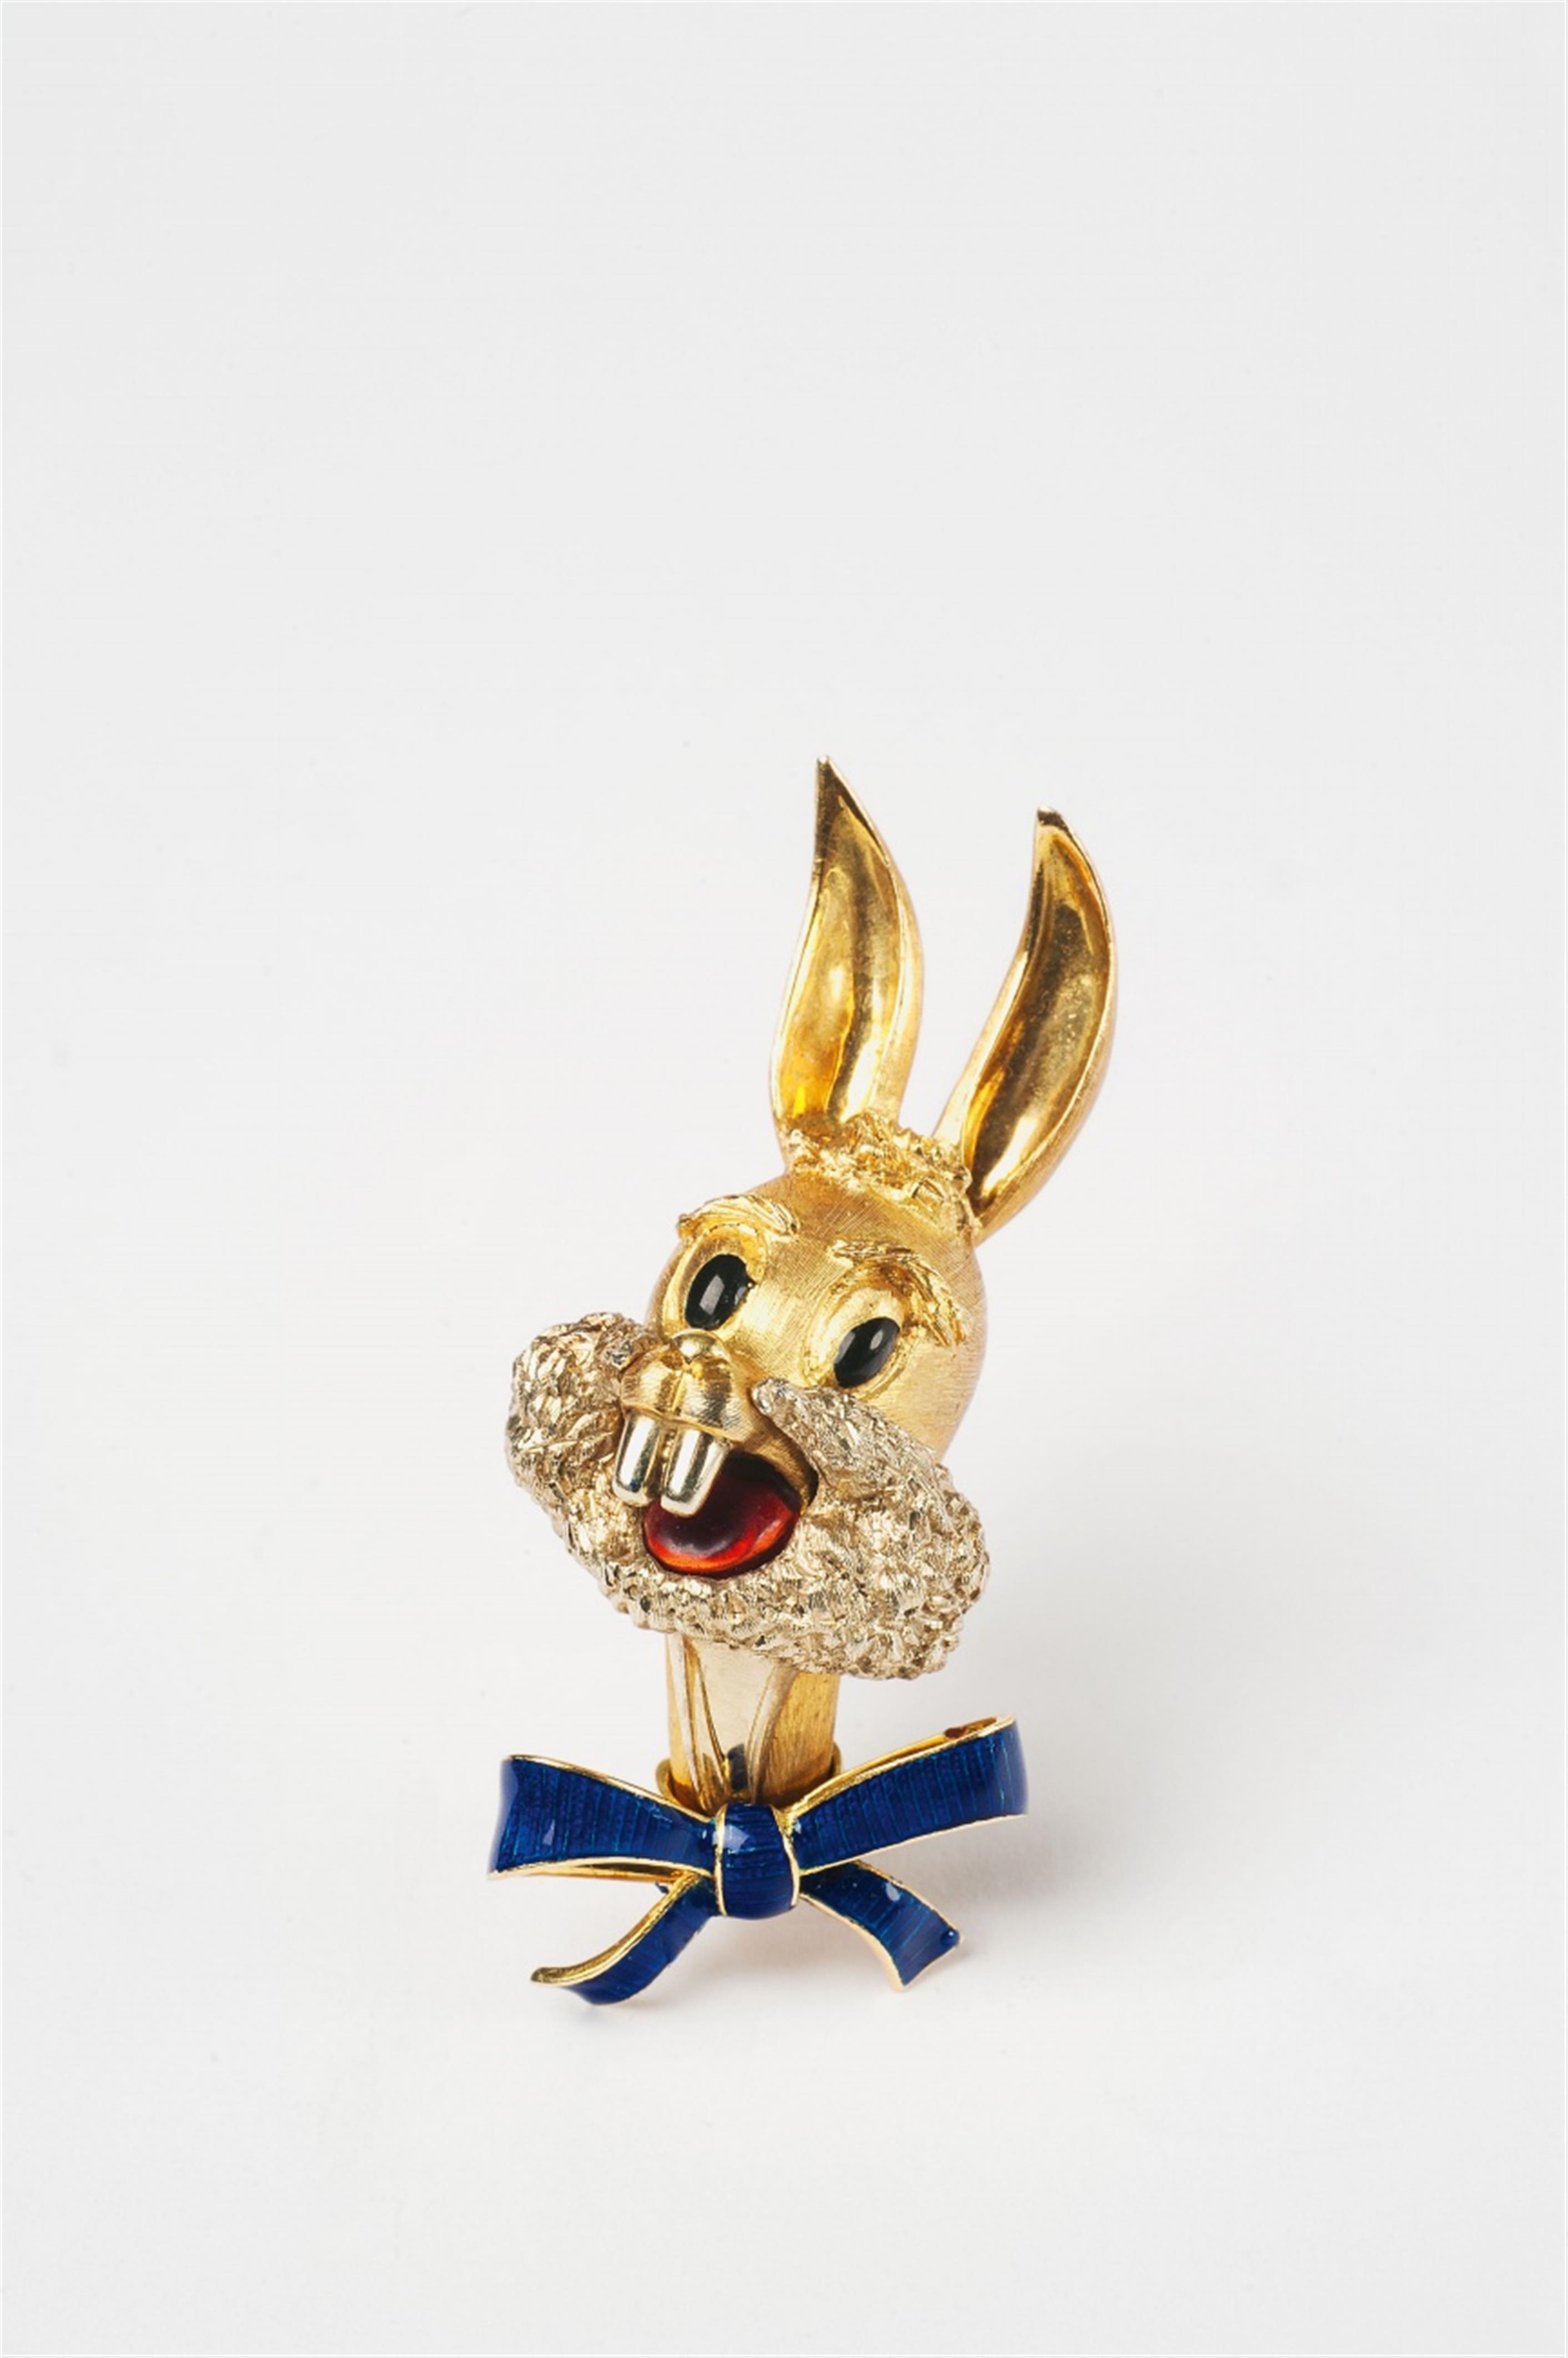 An 18k gold and enamel brooch formed as "Bugs Bunny" - image-2